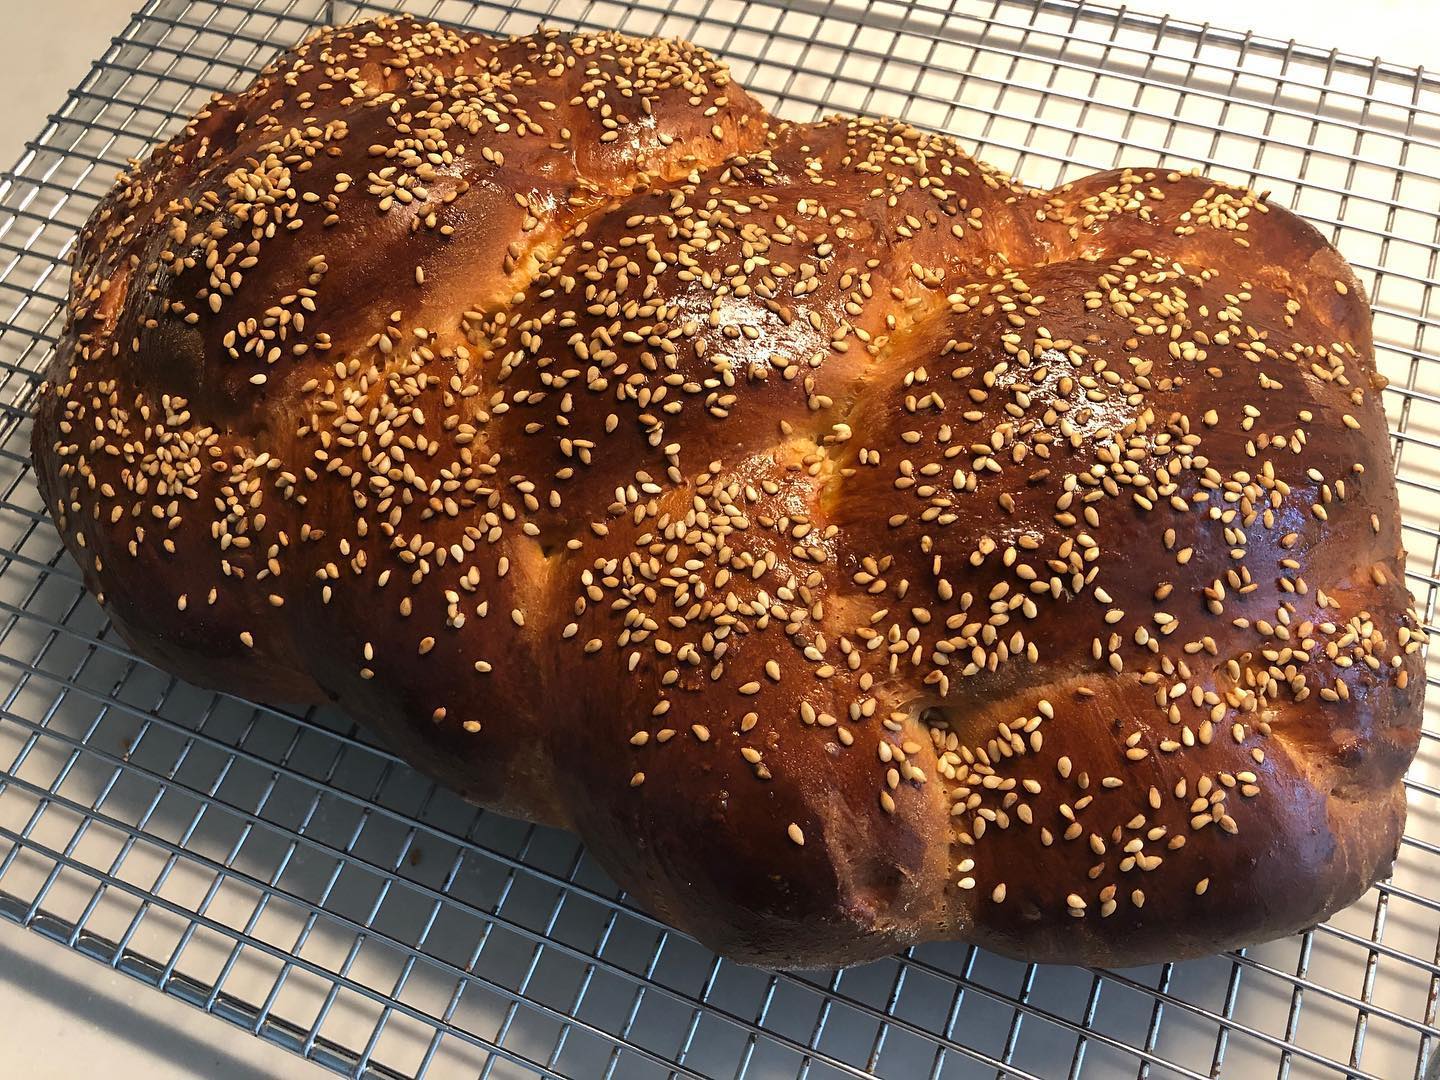 Today’s quarantine project theme song: I ain’t no challahback girl...